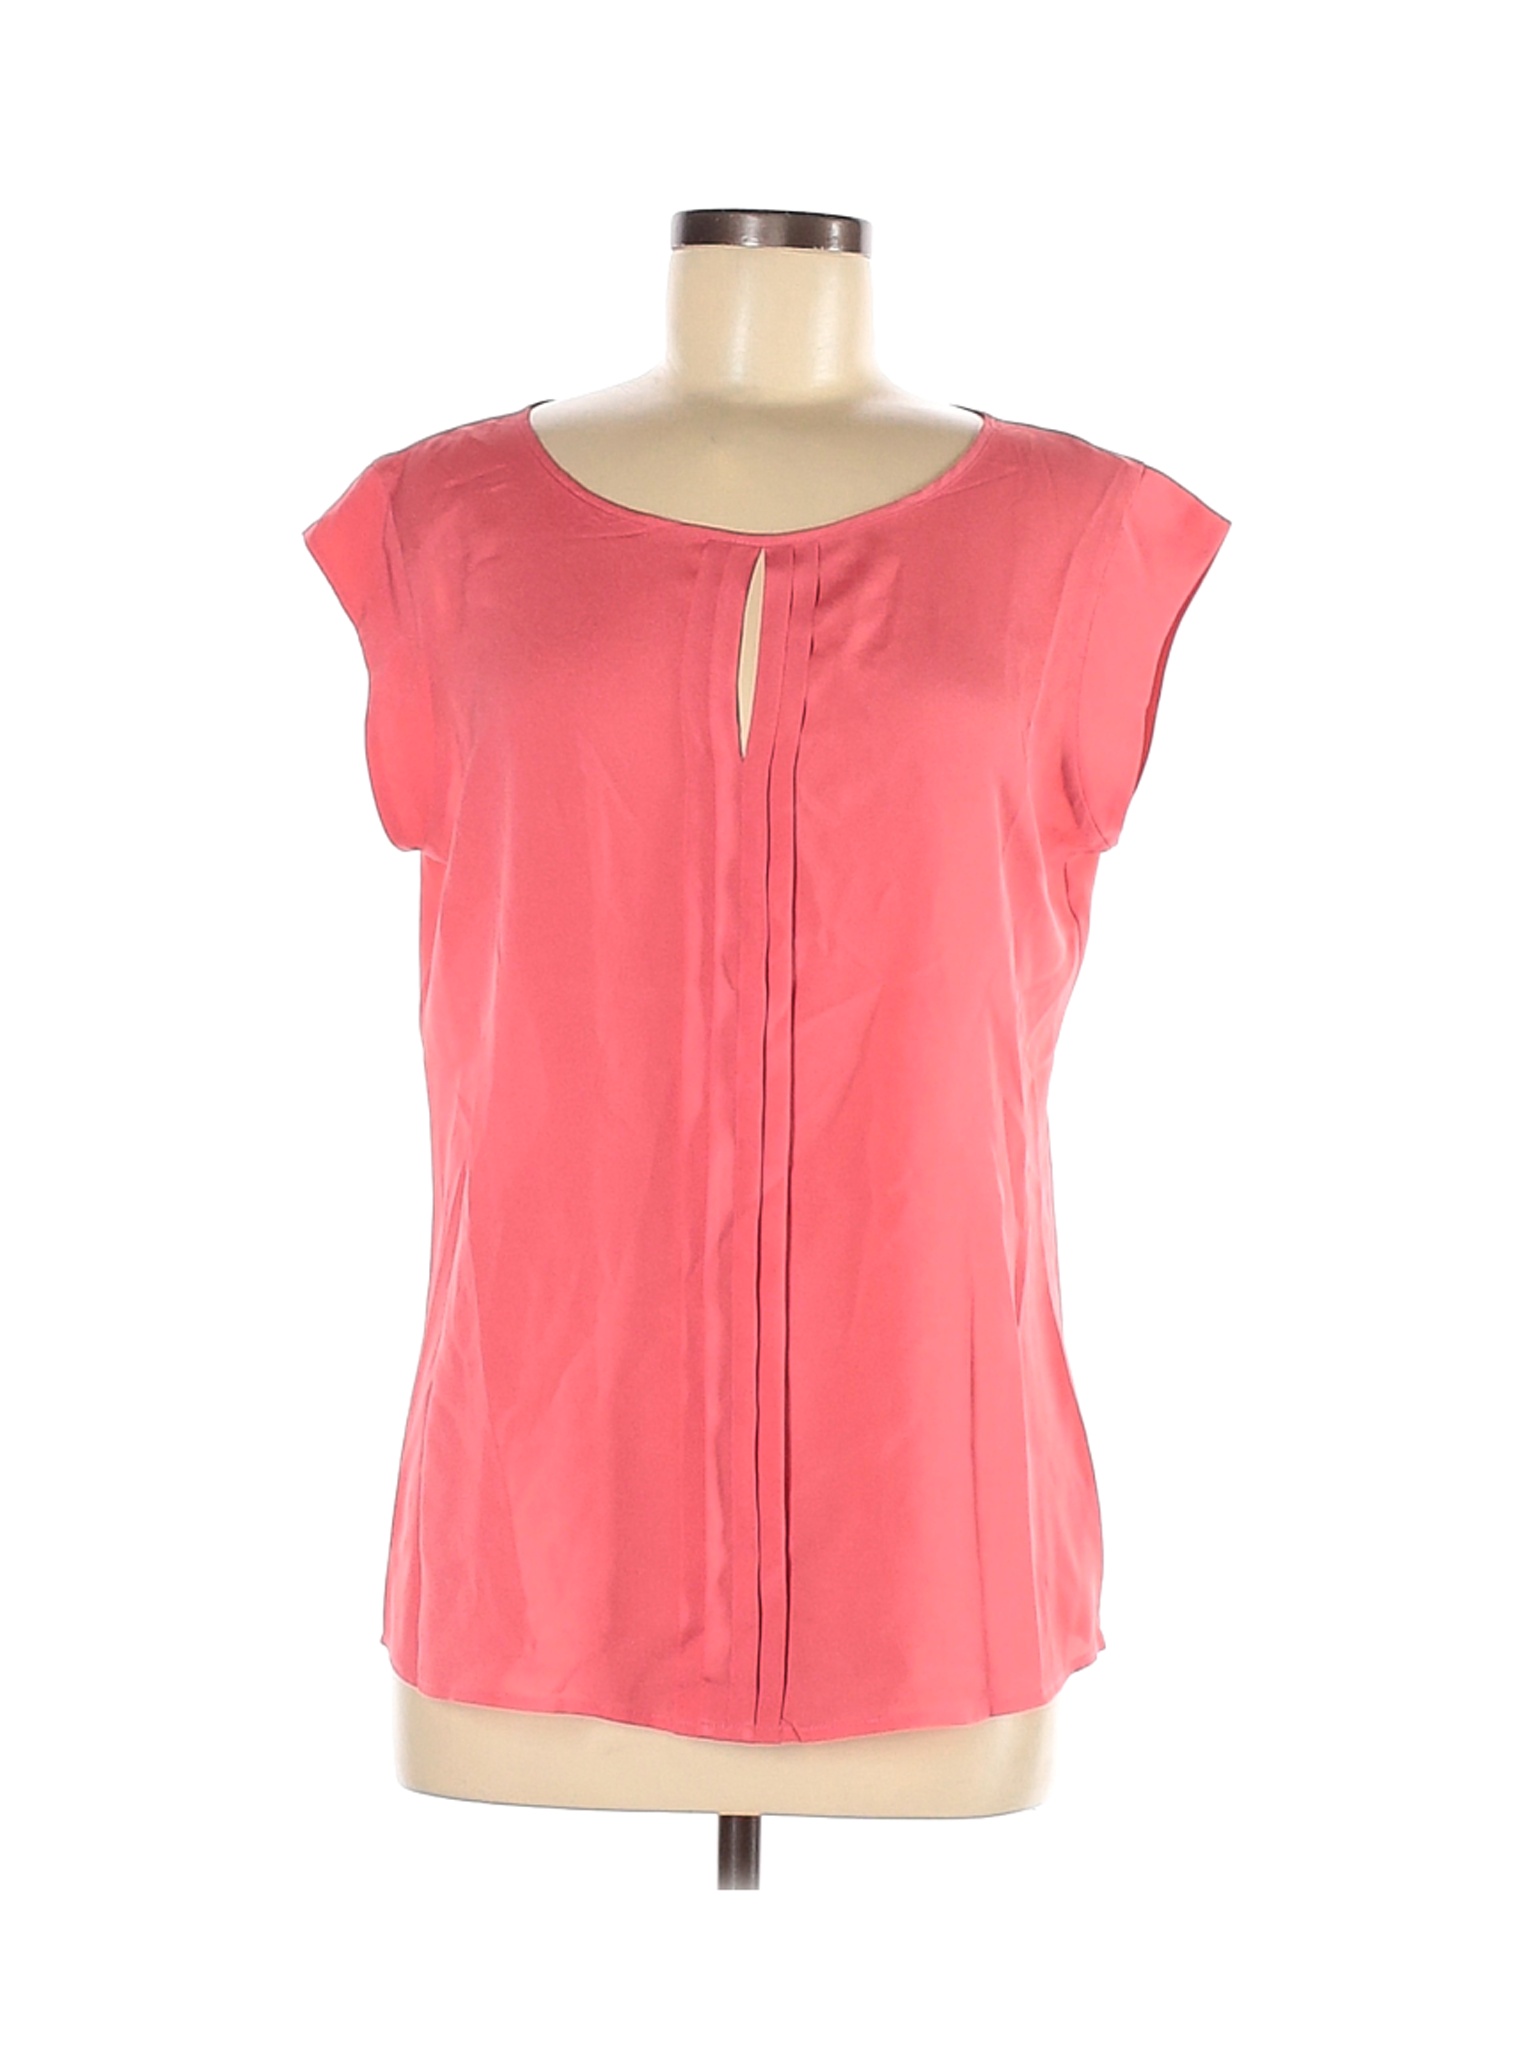 The Limited Women Pink Short Sleeve Blouse M | eBay